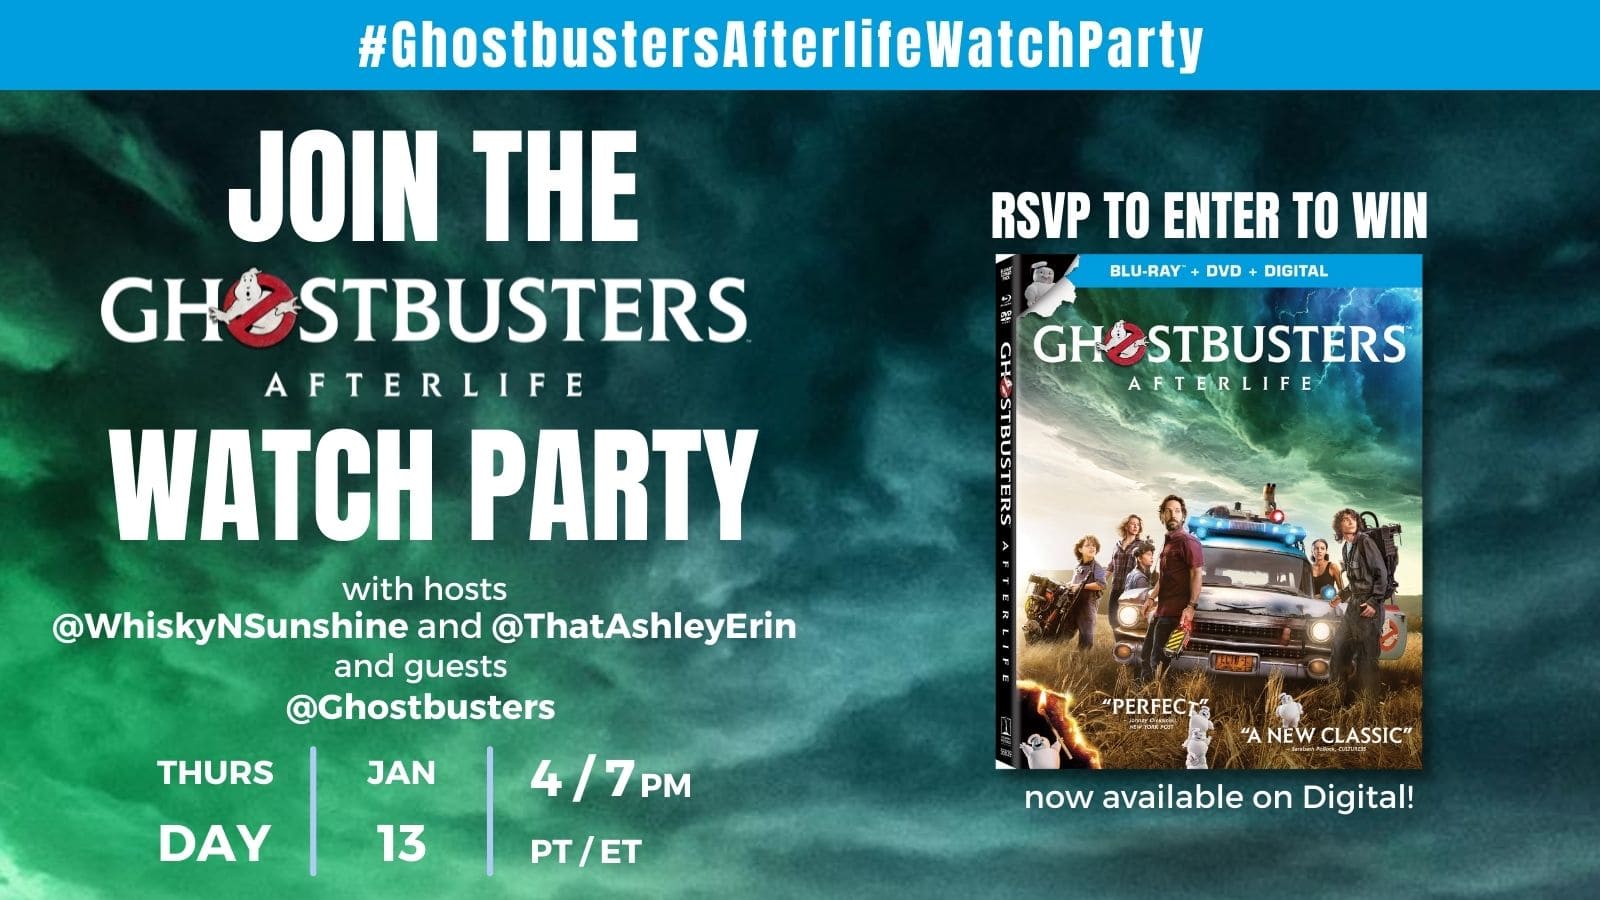 Ghostbusters Afterlife Giveaway